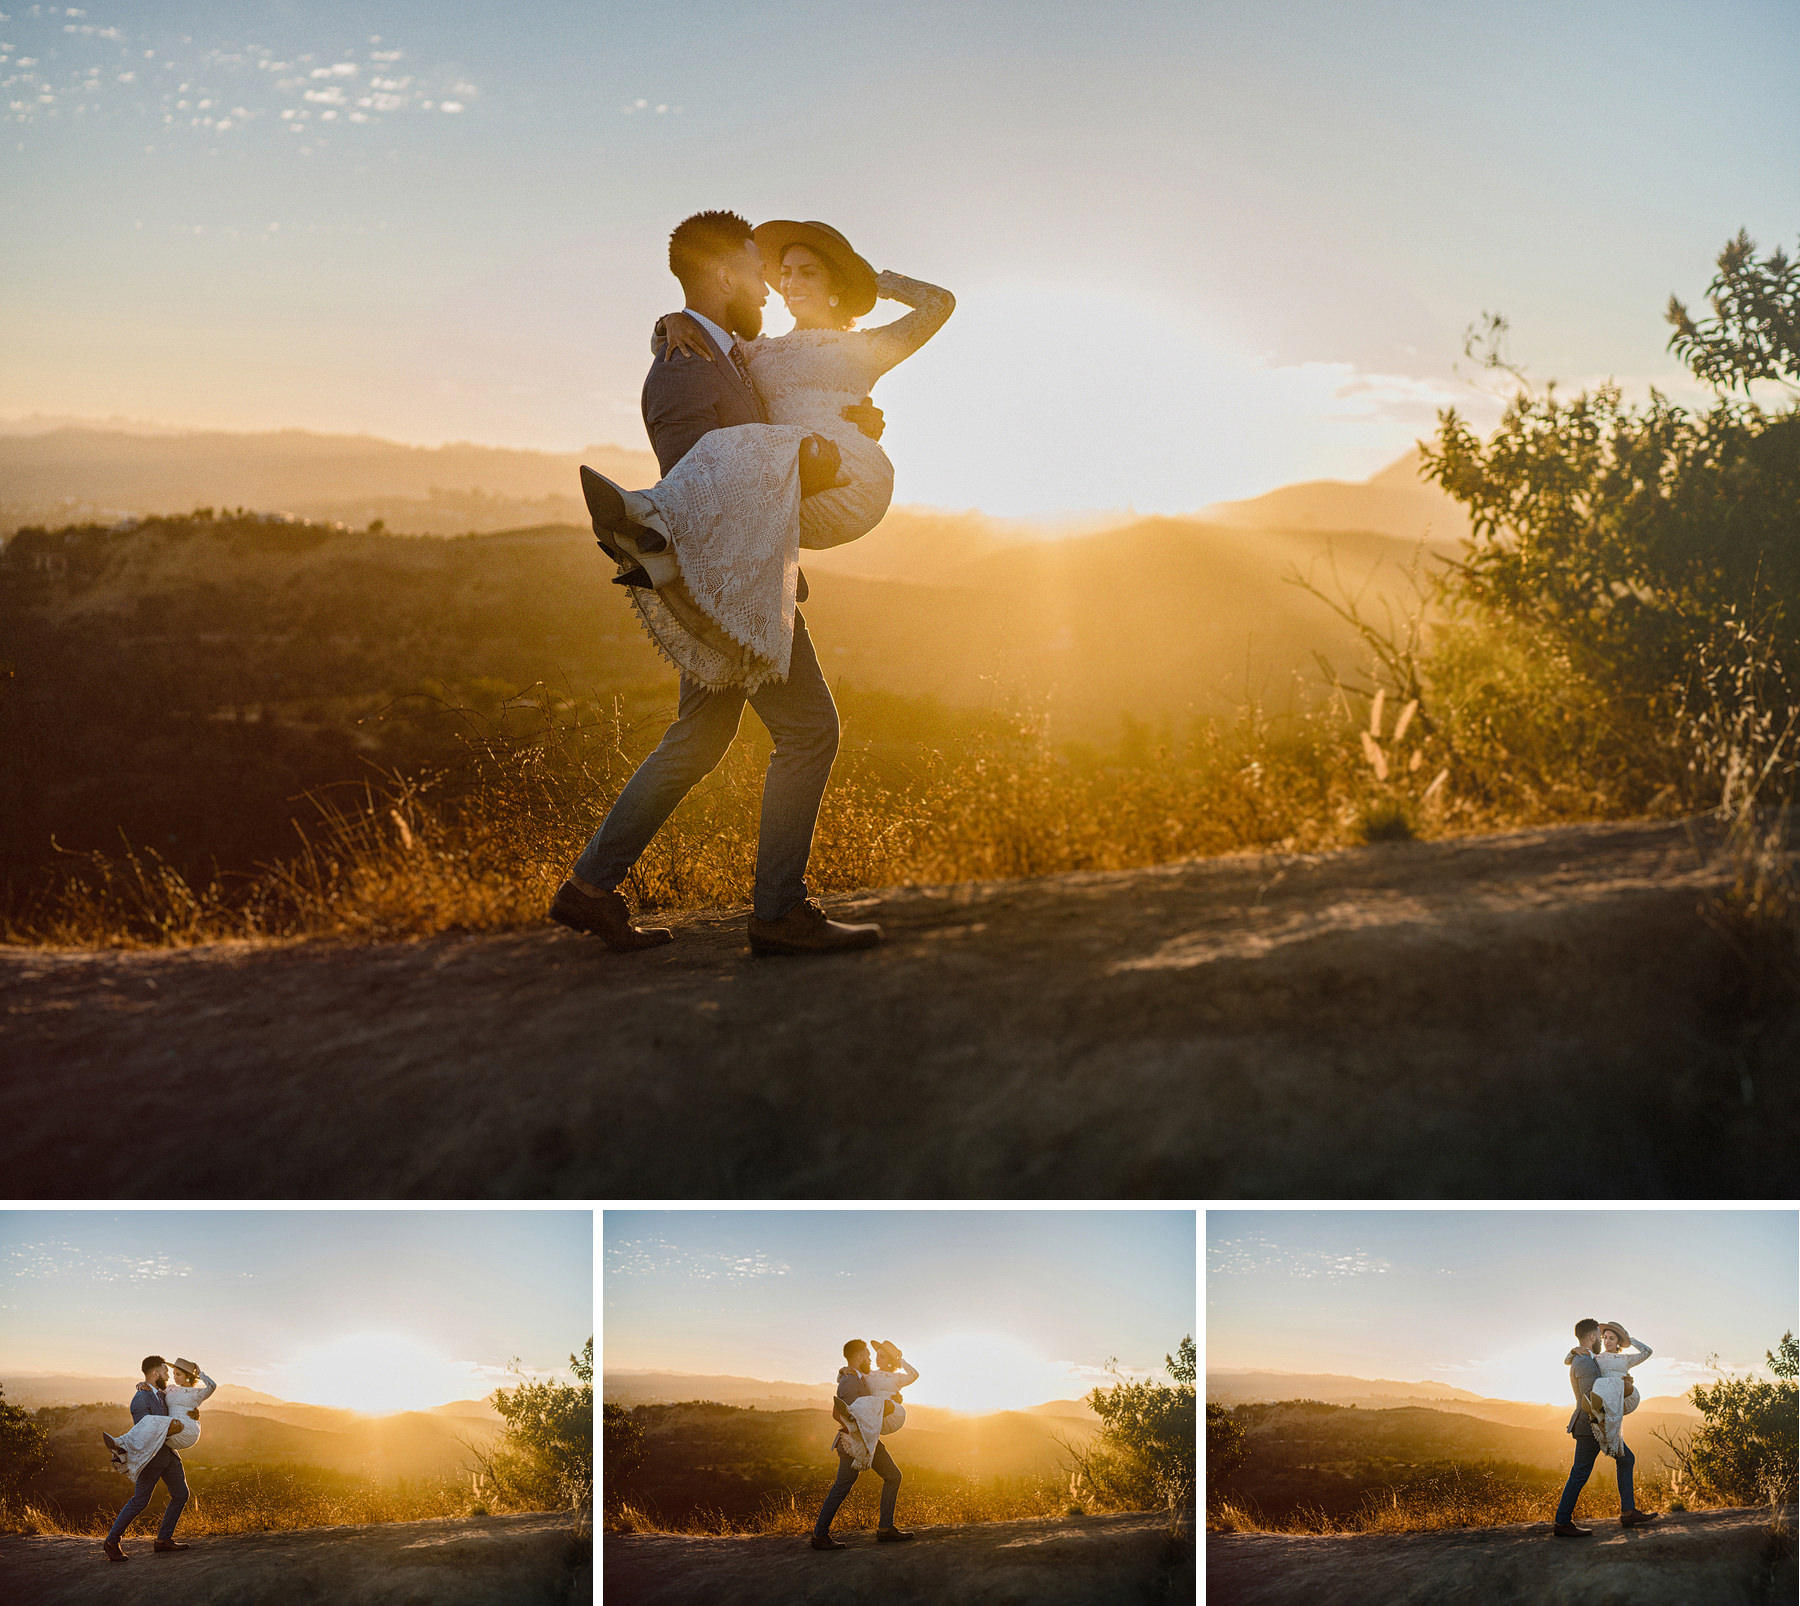 early morning los angeles elopement